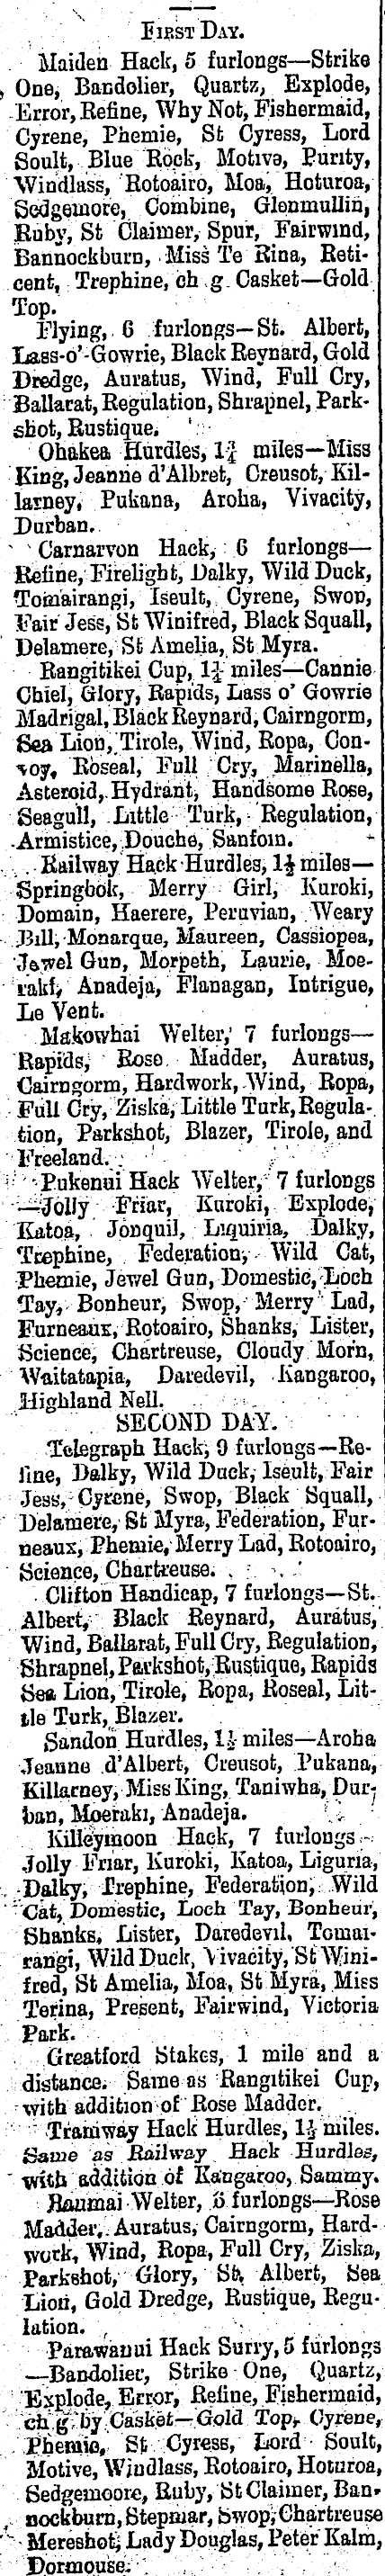 Papers Past | Newspapers | Feilding Star | 13 December 1904 | Rangitikei  Nominations.